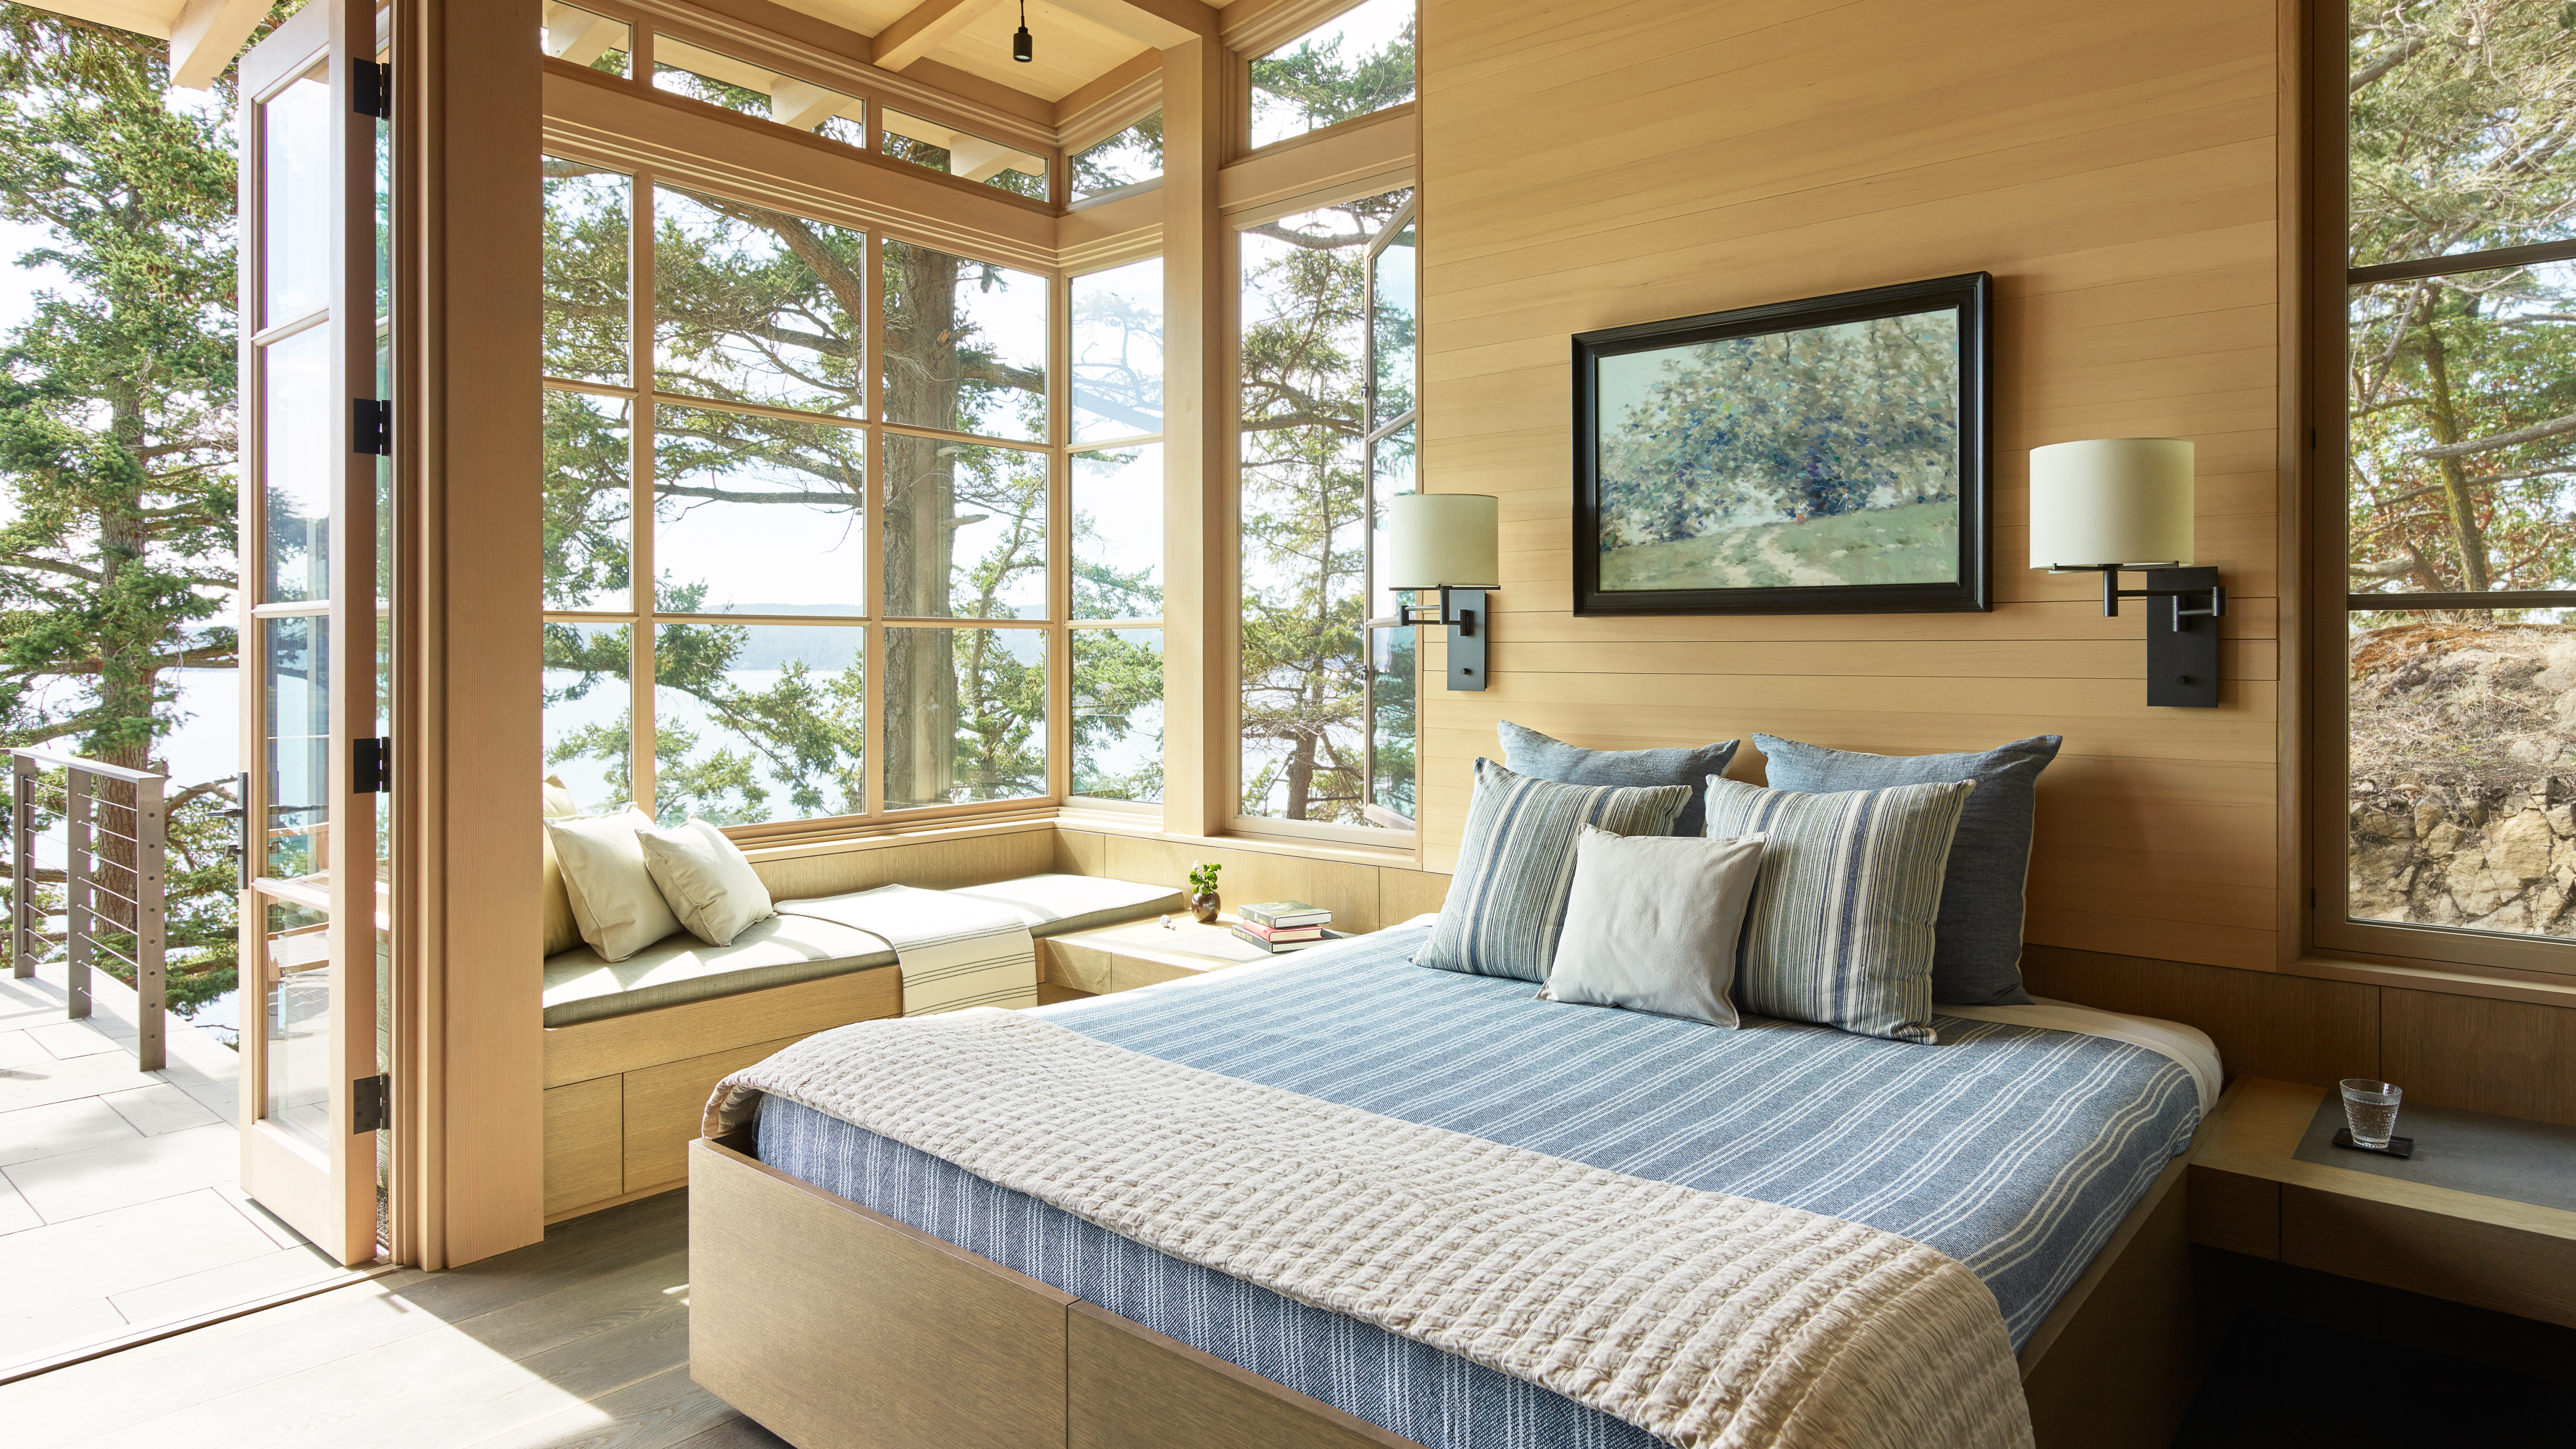 The primary bedroom features warm wood paneling, a built-in window seat, and access to the patio. The room feels warm and inviting with its wood and glass elements.